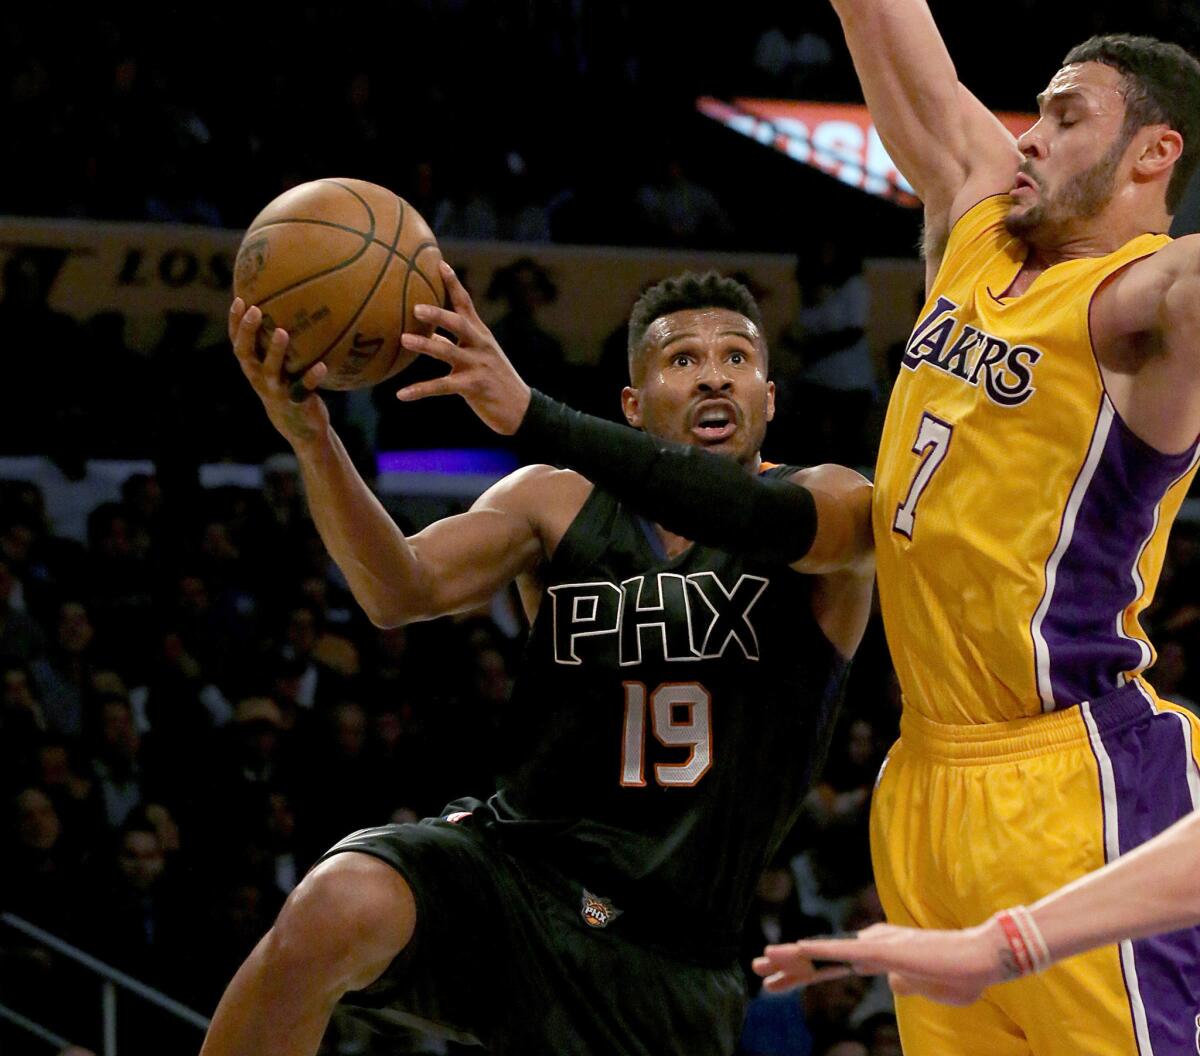 Lakers forward Larry Nance Jr. challenges a shot by Suns guard Leandro Barbosa in the first quarter.